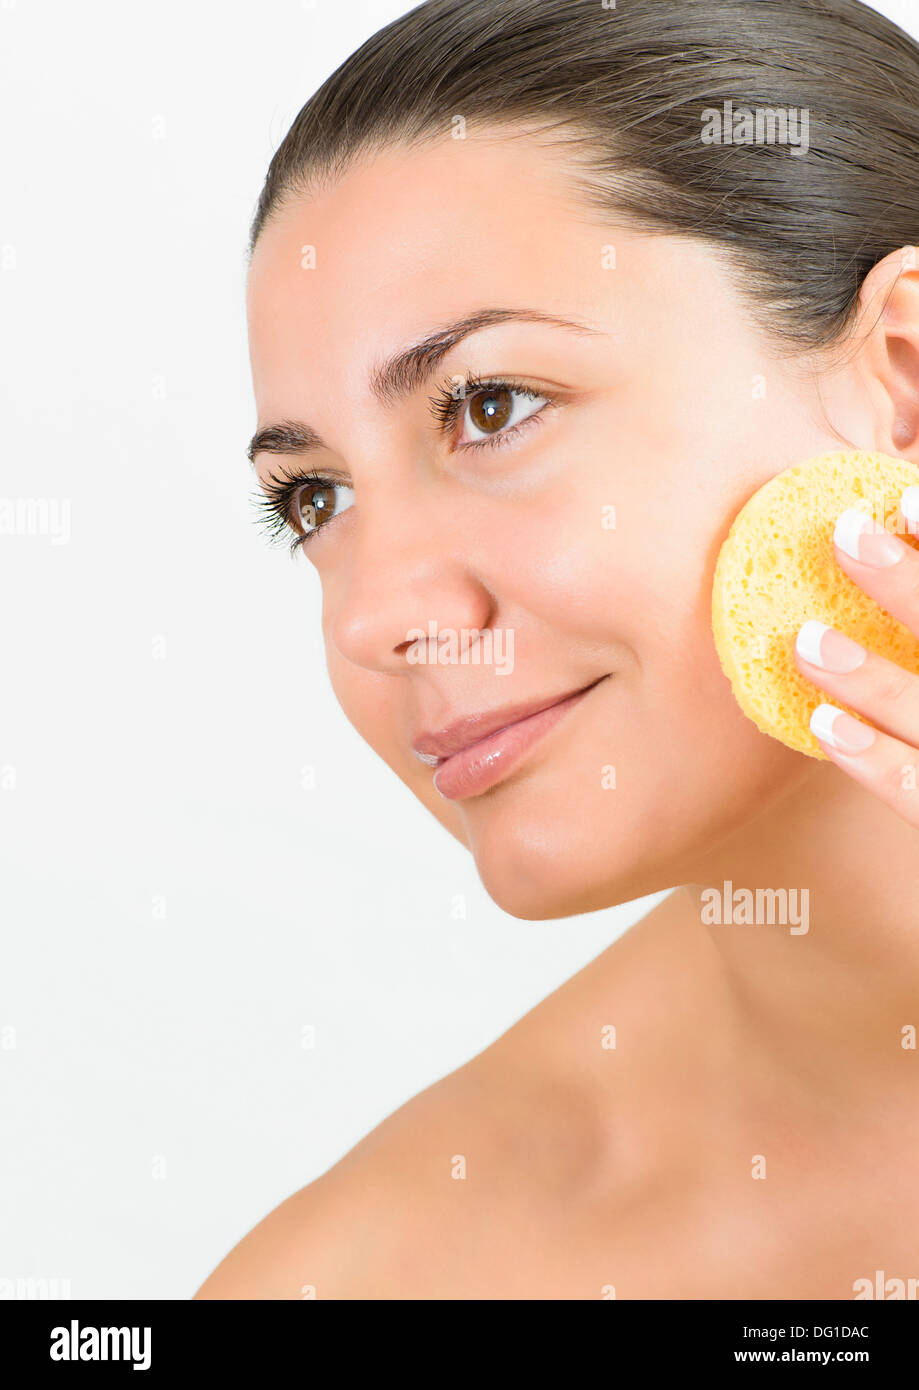 Young woman cleaning skin with cotton pad Stock Photo